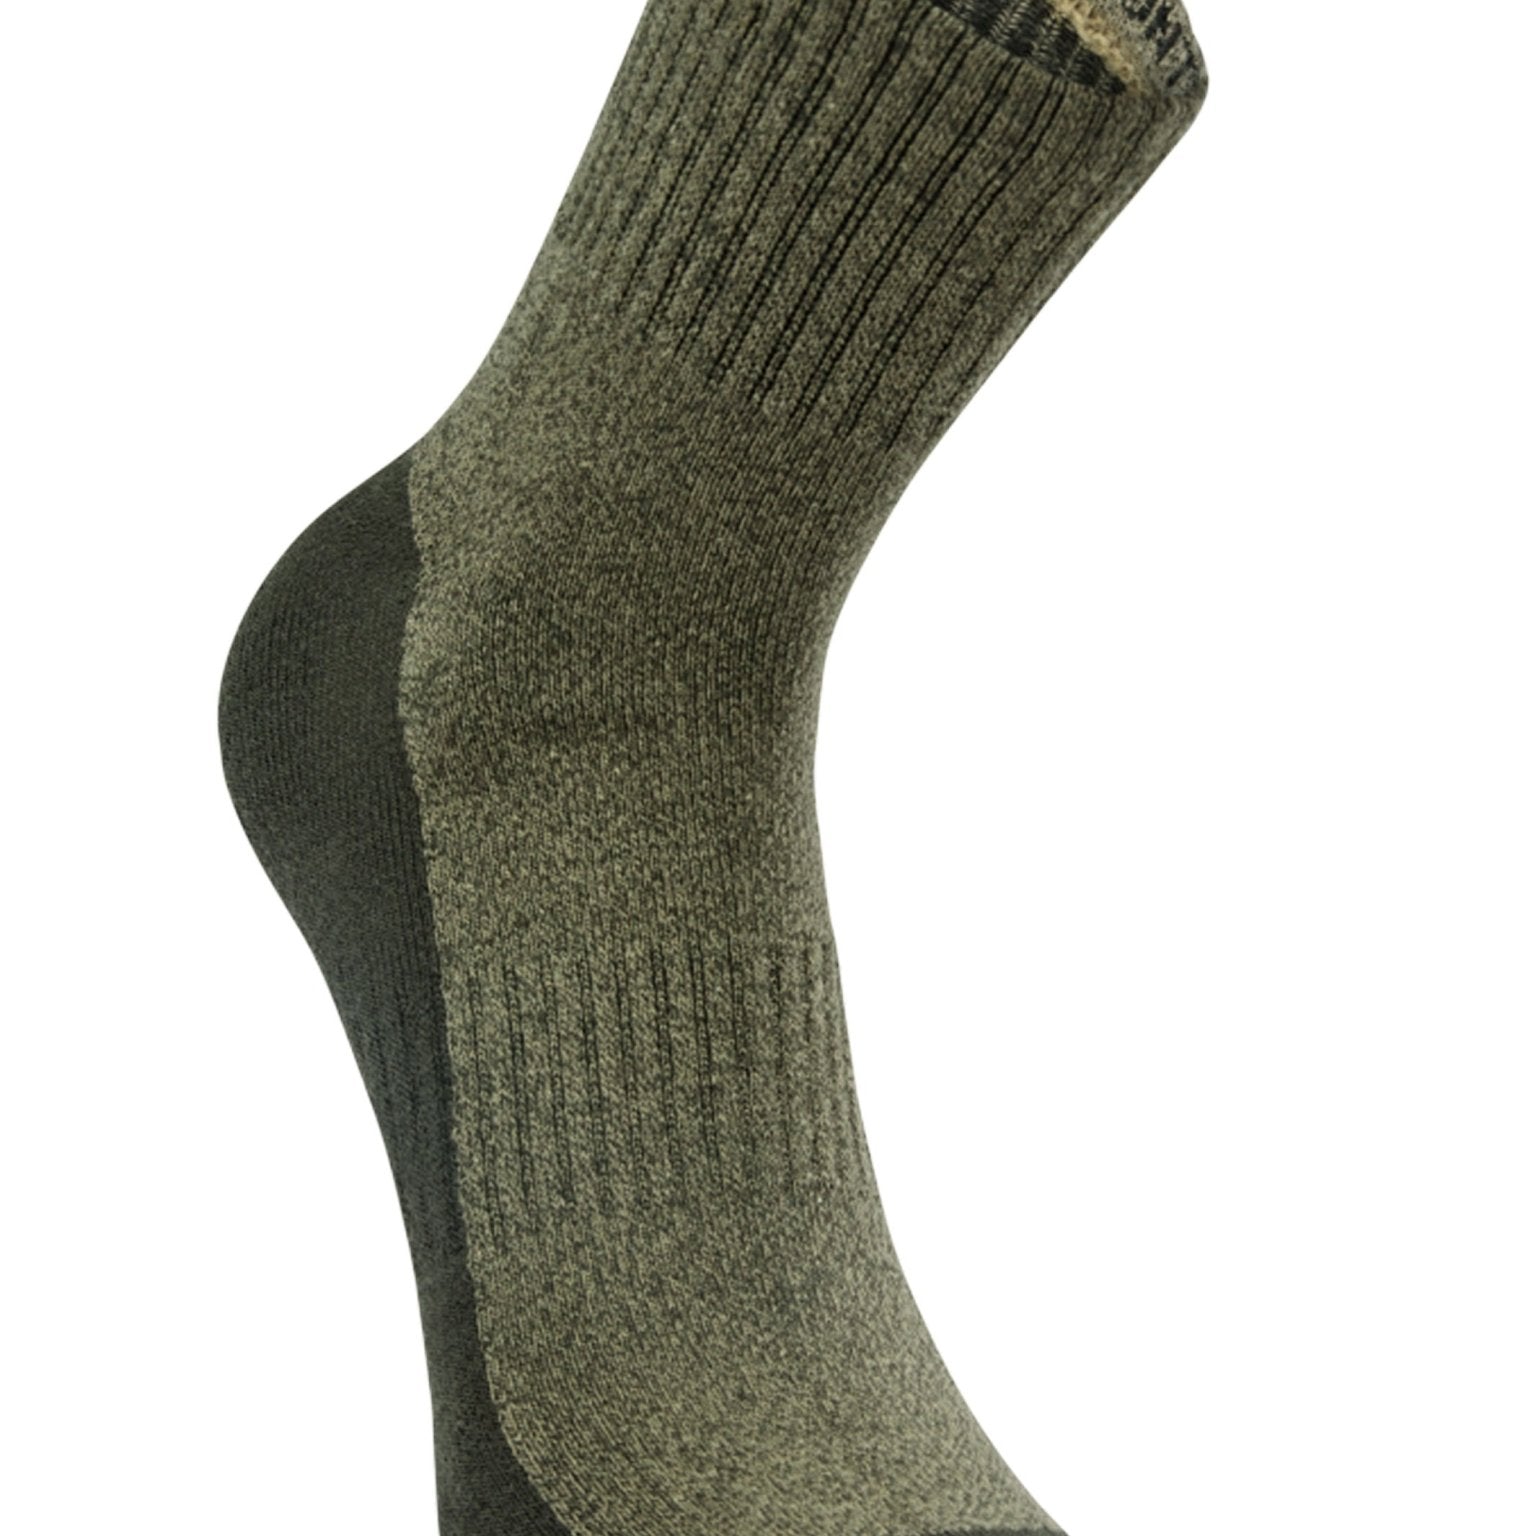 4elementsclothingDeerhunterDeerhunter - Hemp Mix Ankle Socks - Terry sole for comfort and shock absorption Ribbed arch supportSocks8304-331-3639